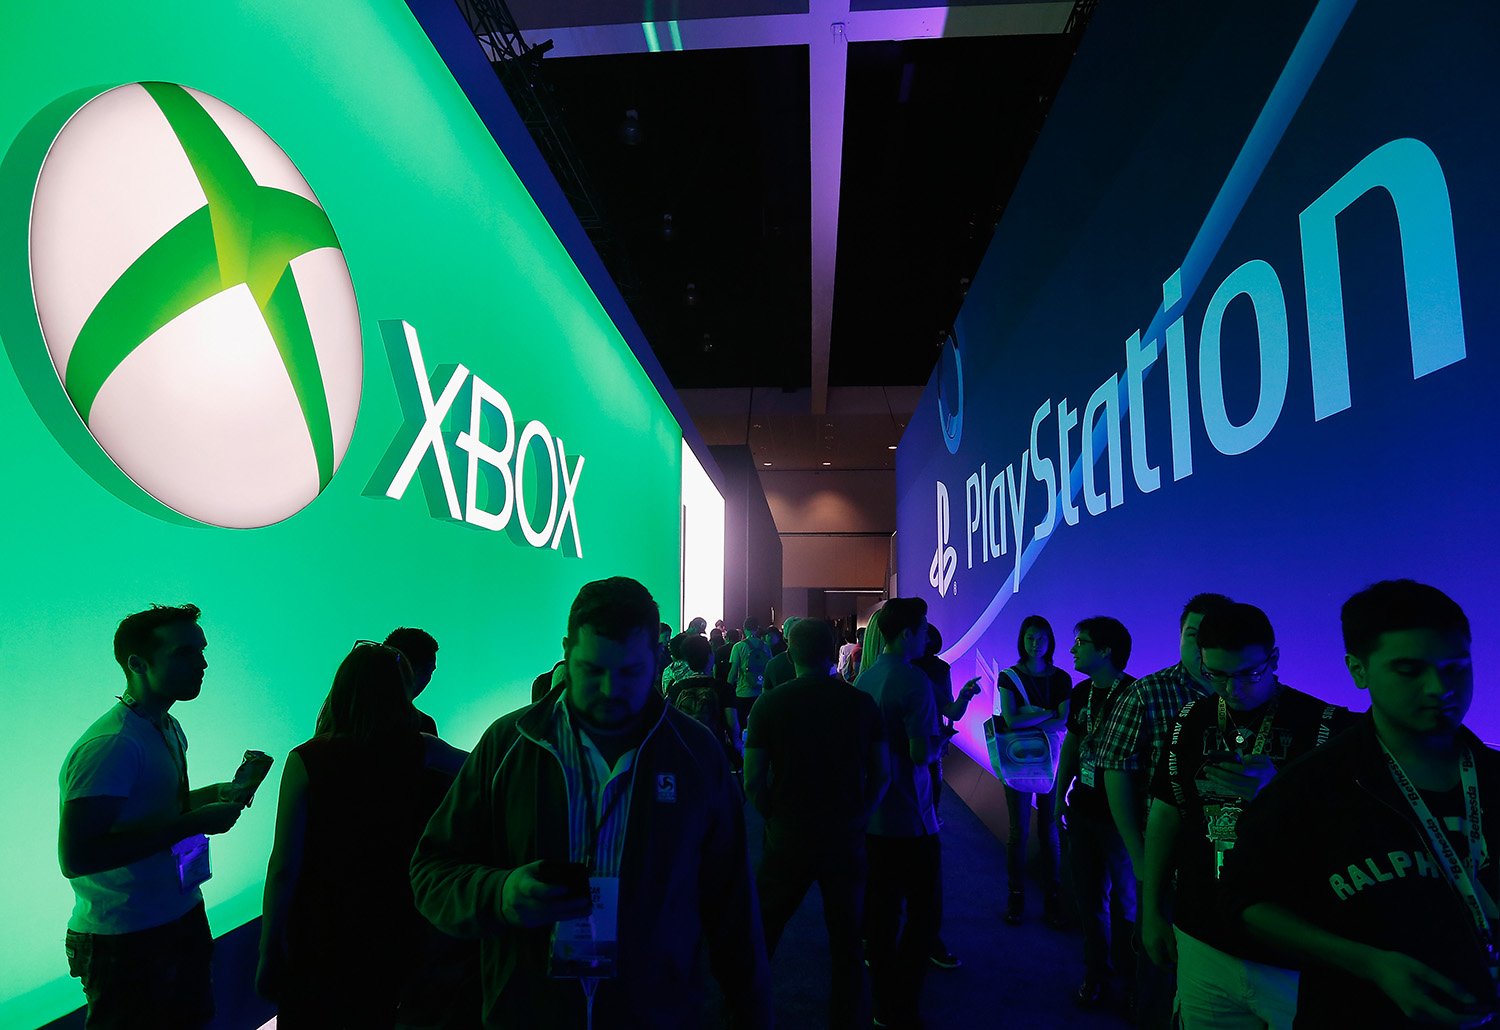 Democratie Bliksem kaping With the next Xbox, Microsoft has a 4-part strategy to end the console wars  once and for all. Here's how it plans to do it. (MSFT, SNE) | Pulse Nigeria